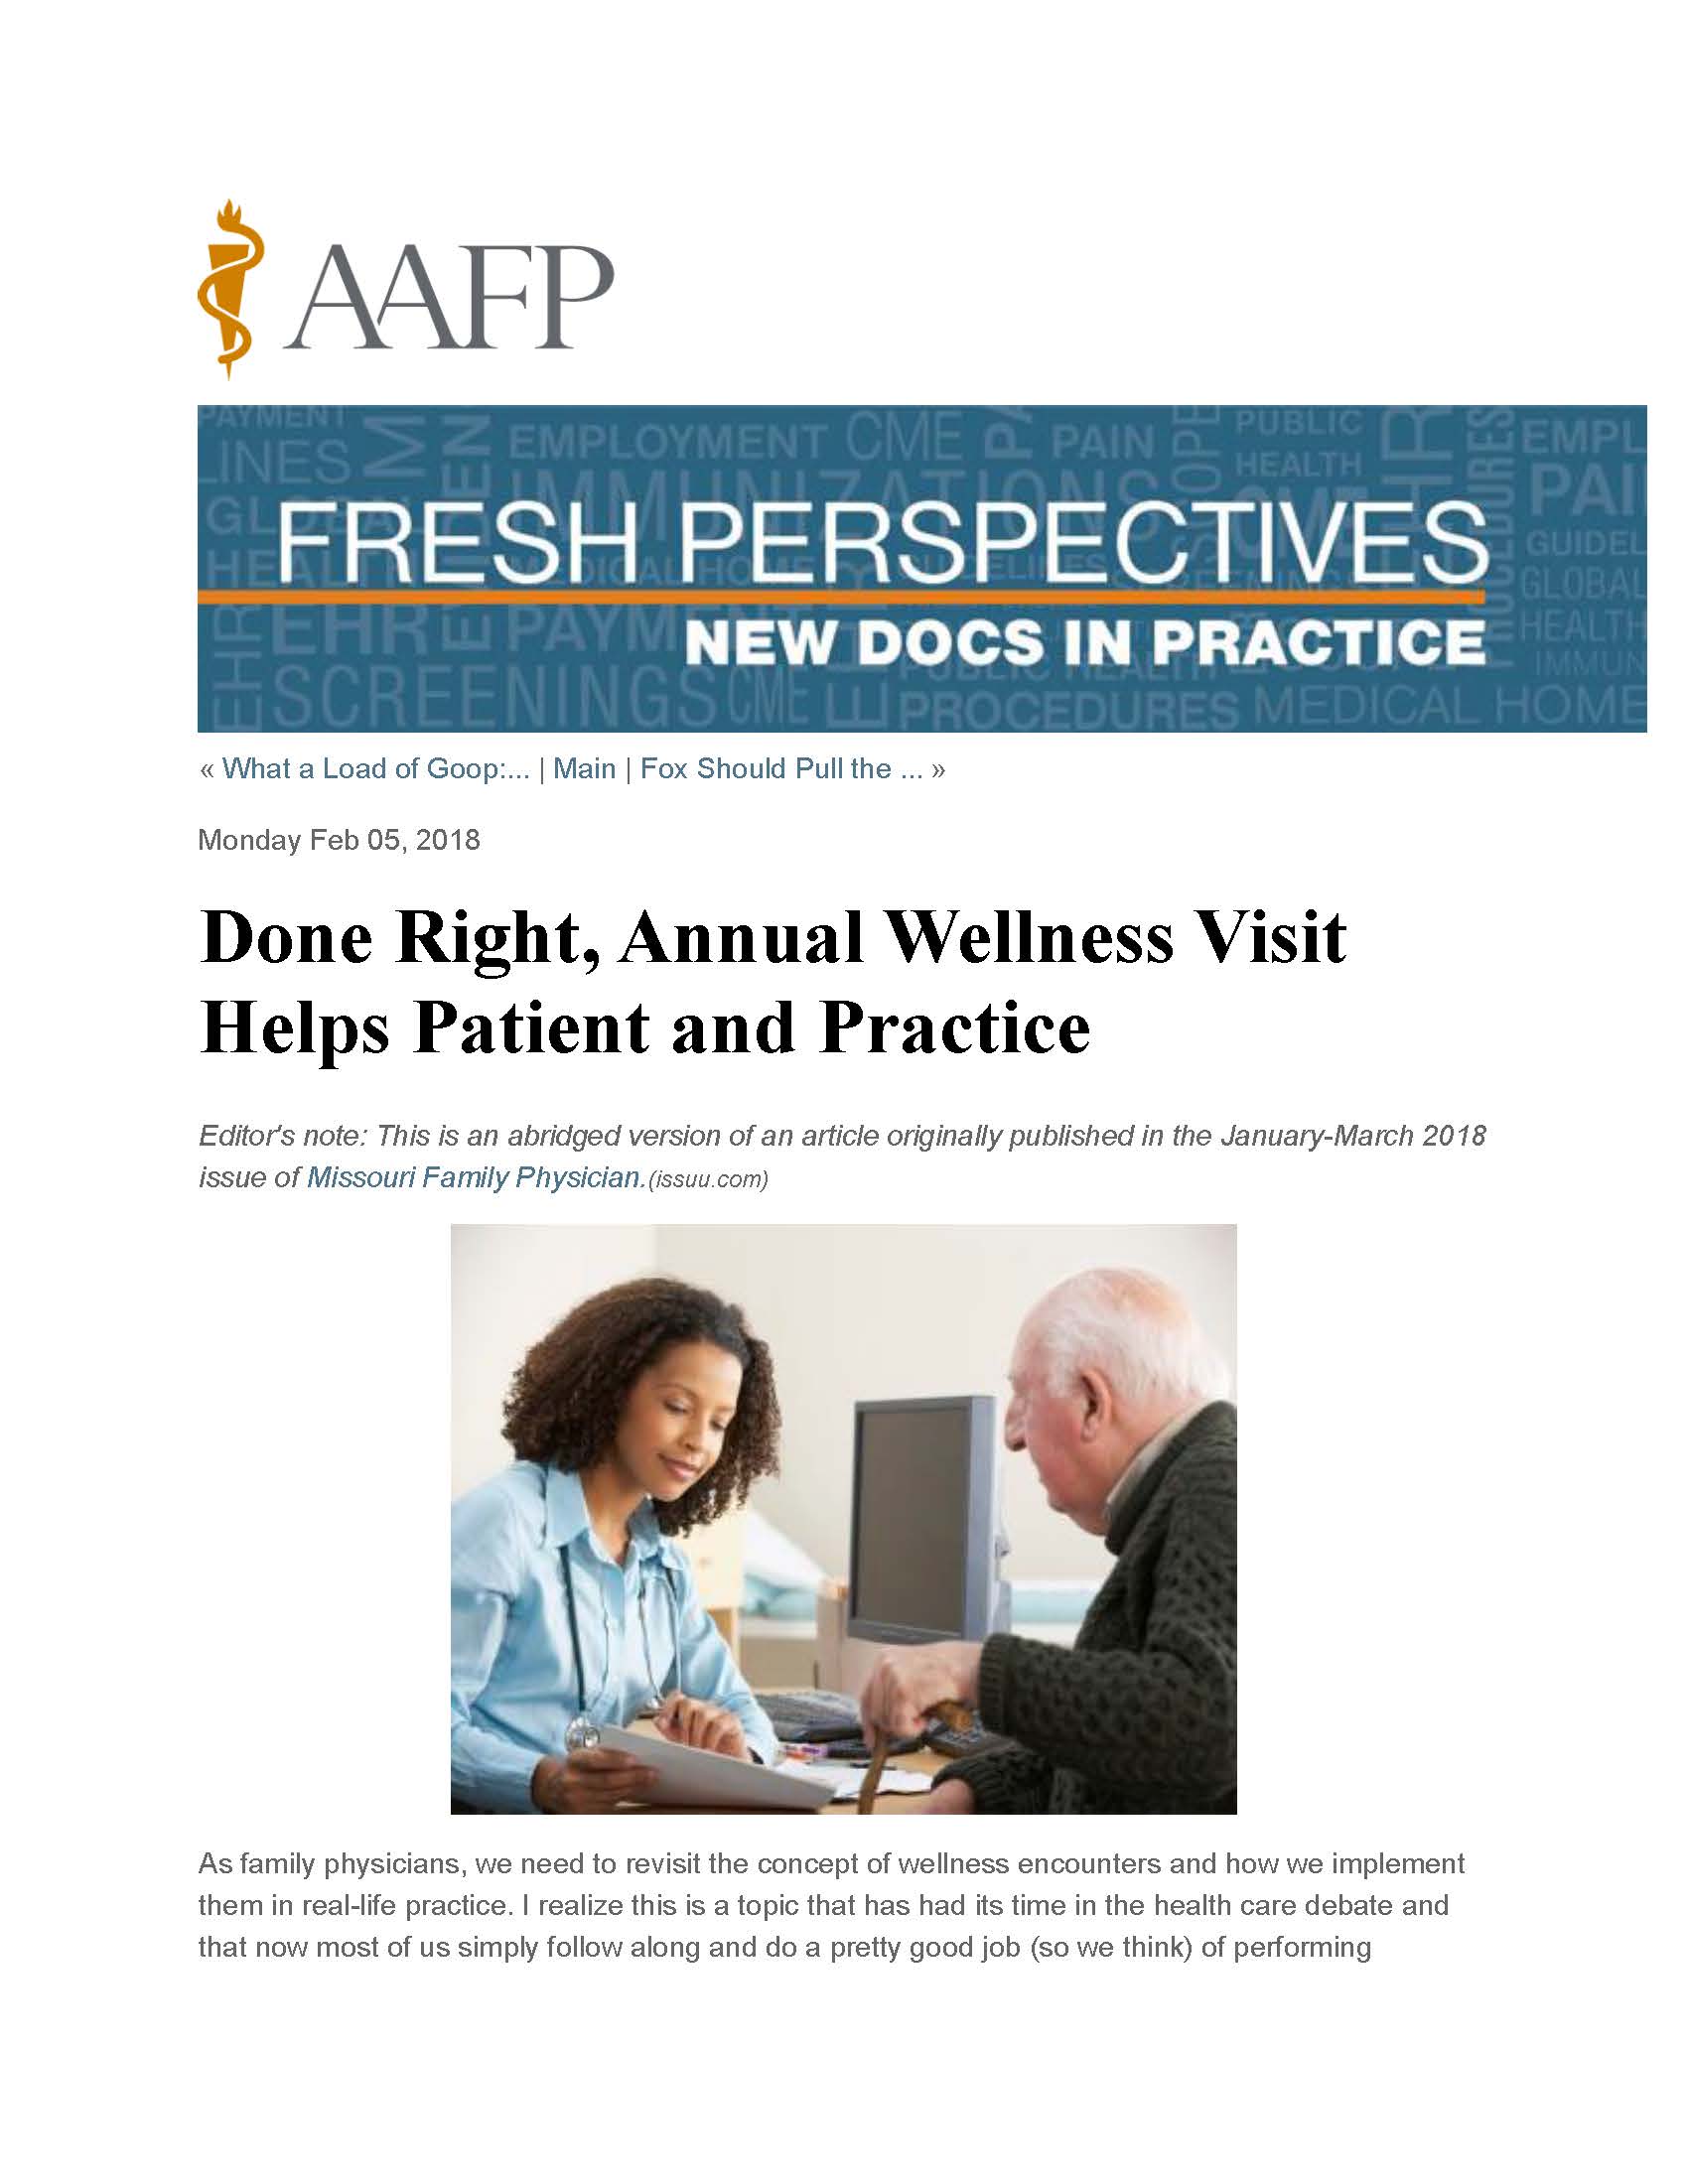 AAFP Fresh Perspectives